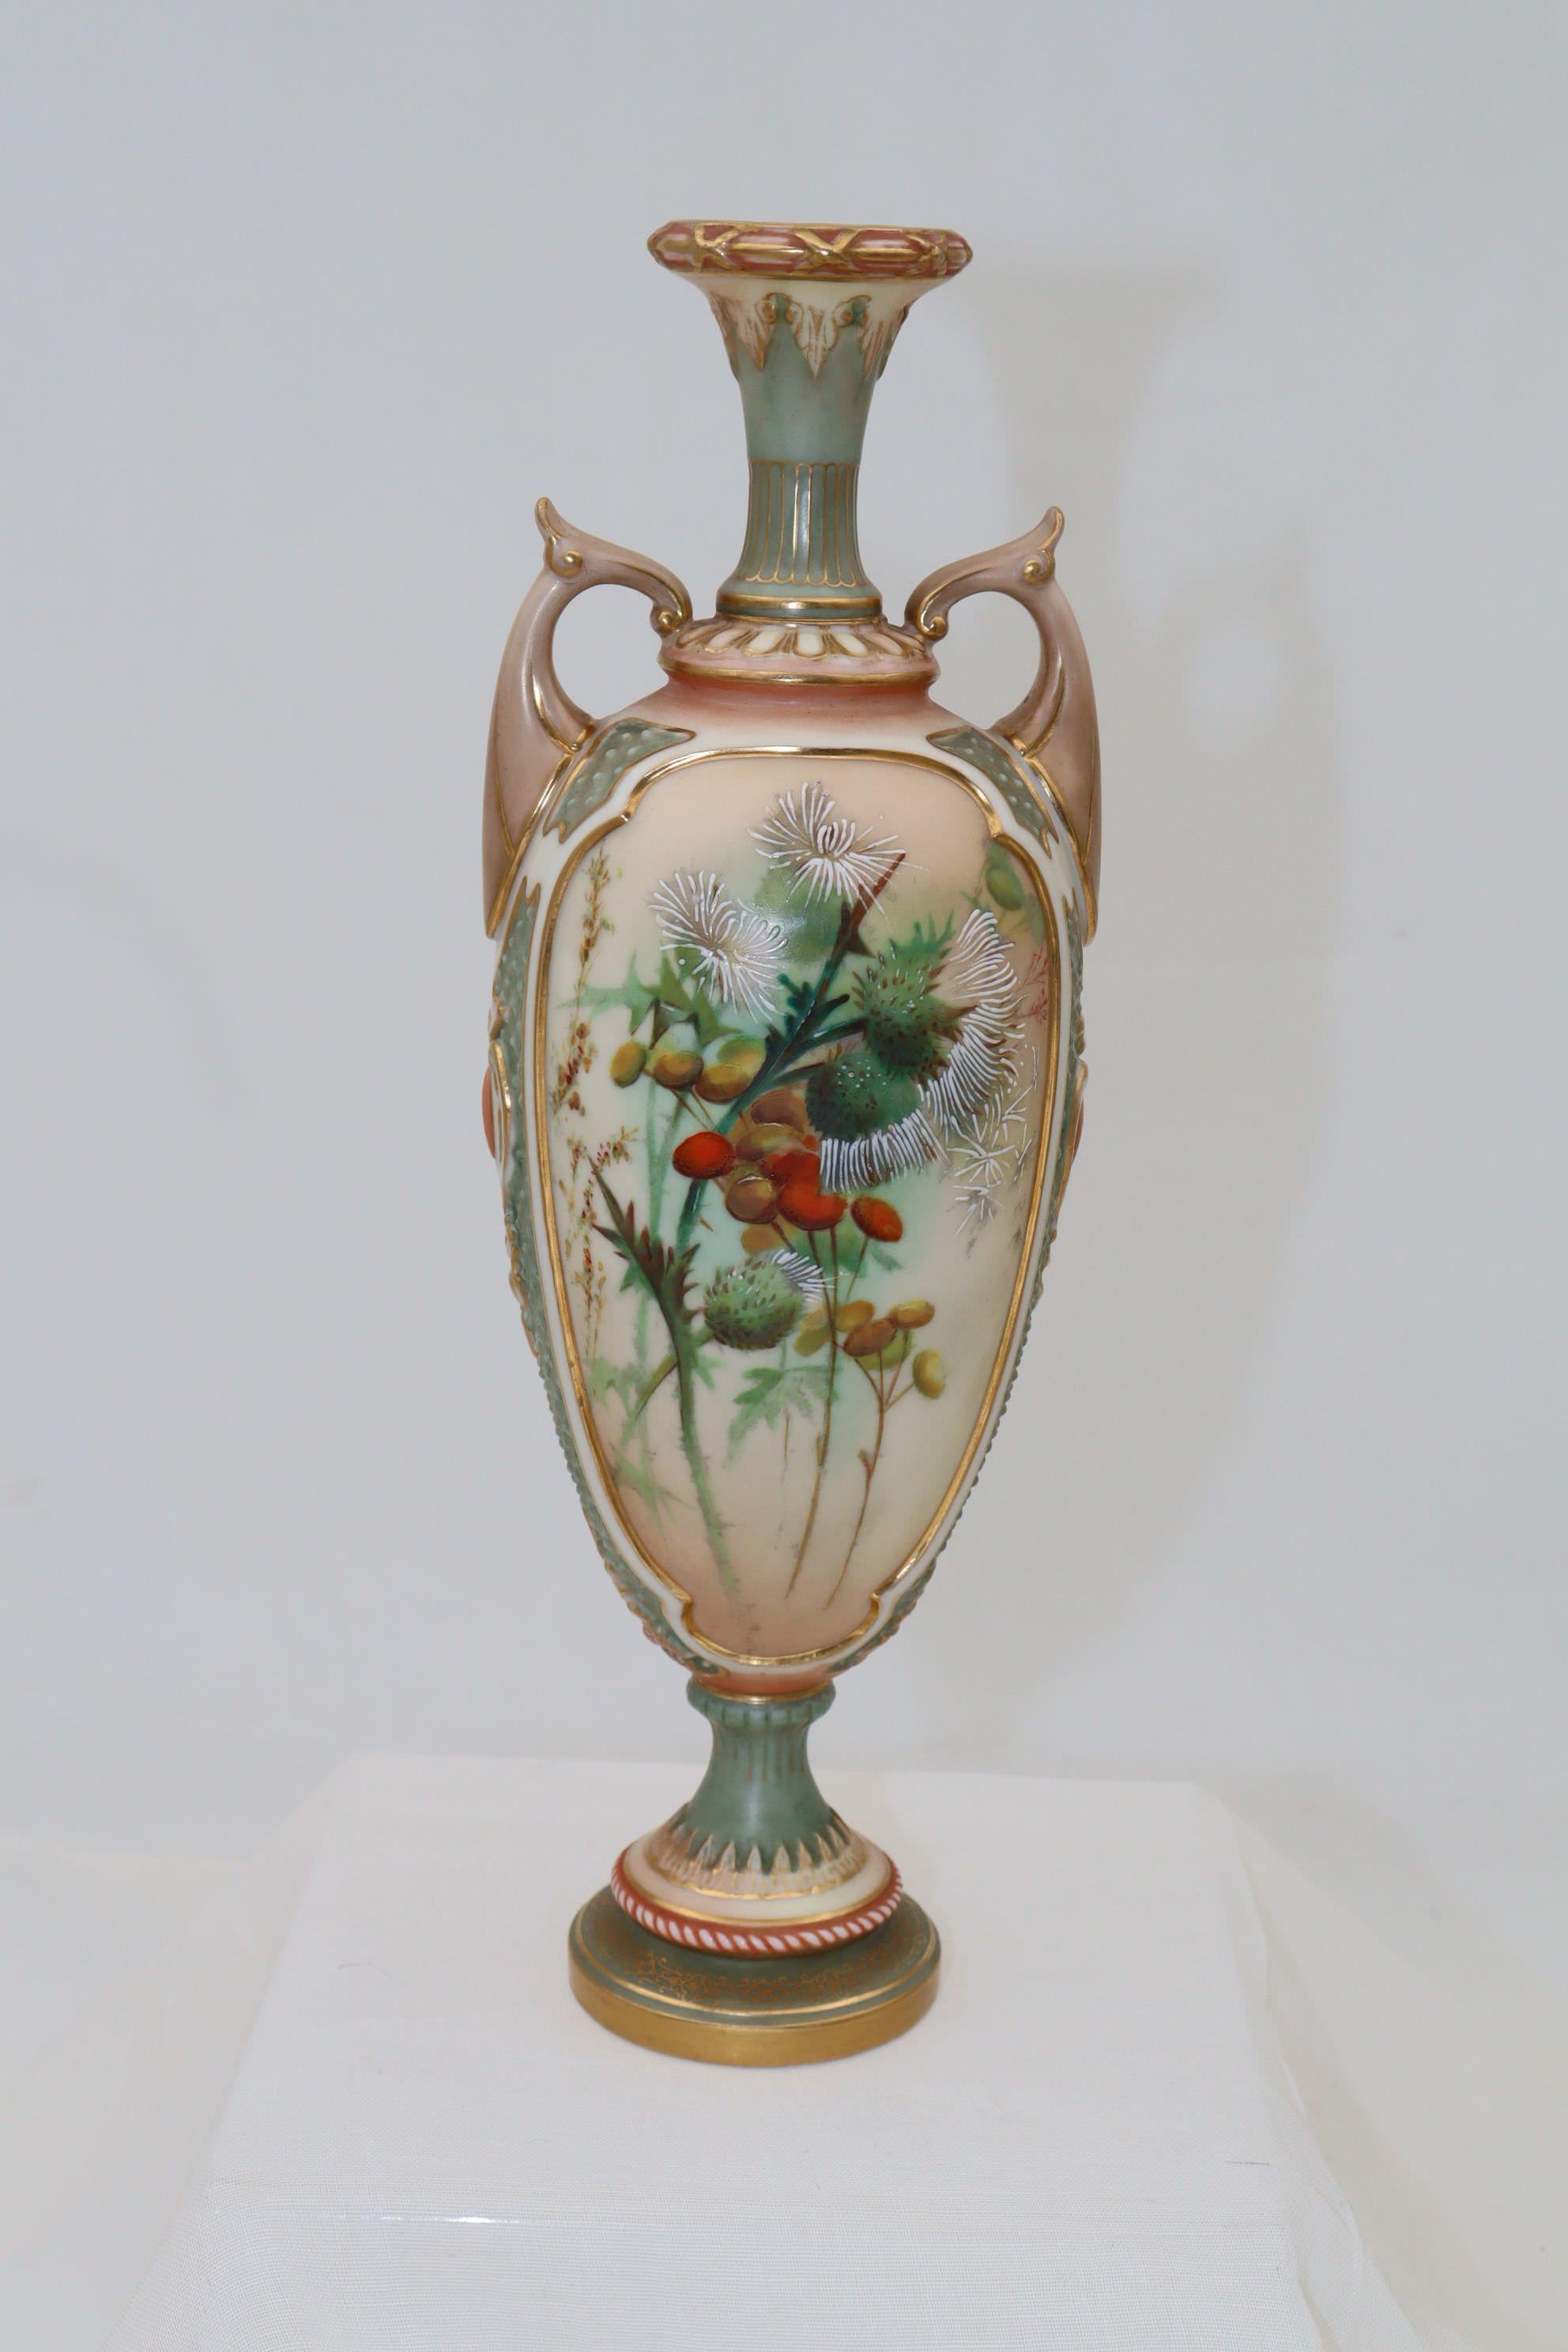 The front of this Royal Worcester porcelain vase features a spray of hand painted thistles and other flowers in the style of Edward Raby junior. Raby (b. 1863) was at Royal Worcester from about 1875 through to 1896, and was one of the principal